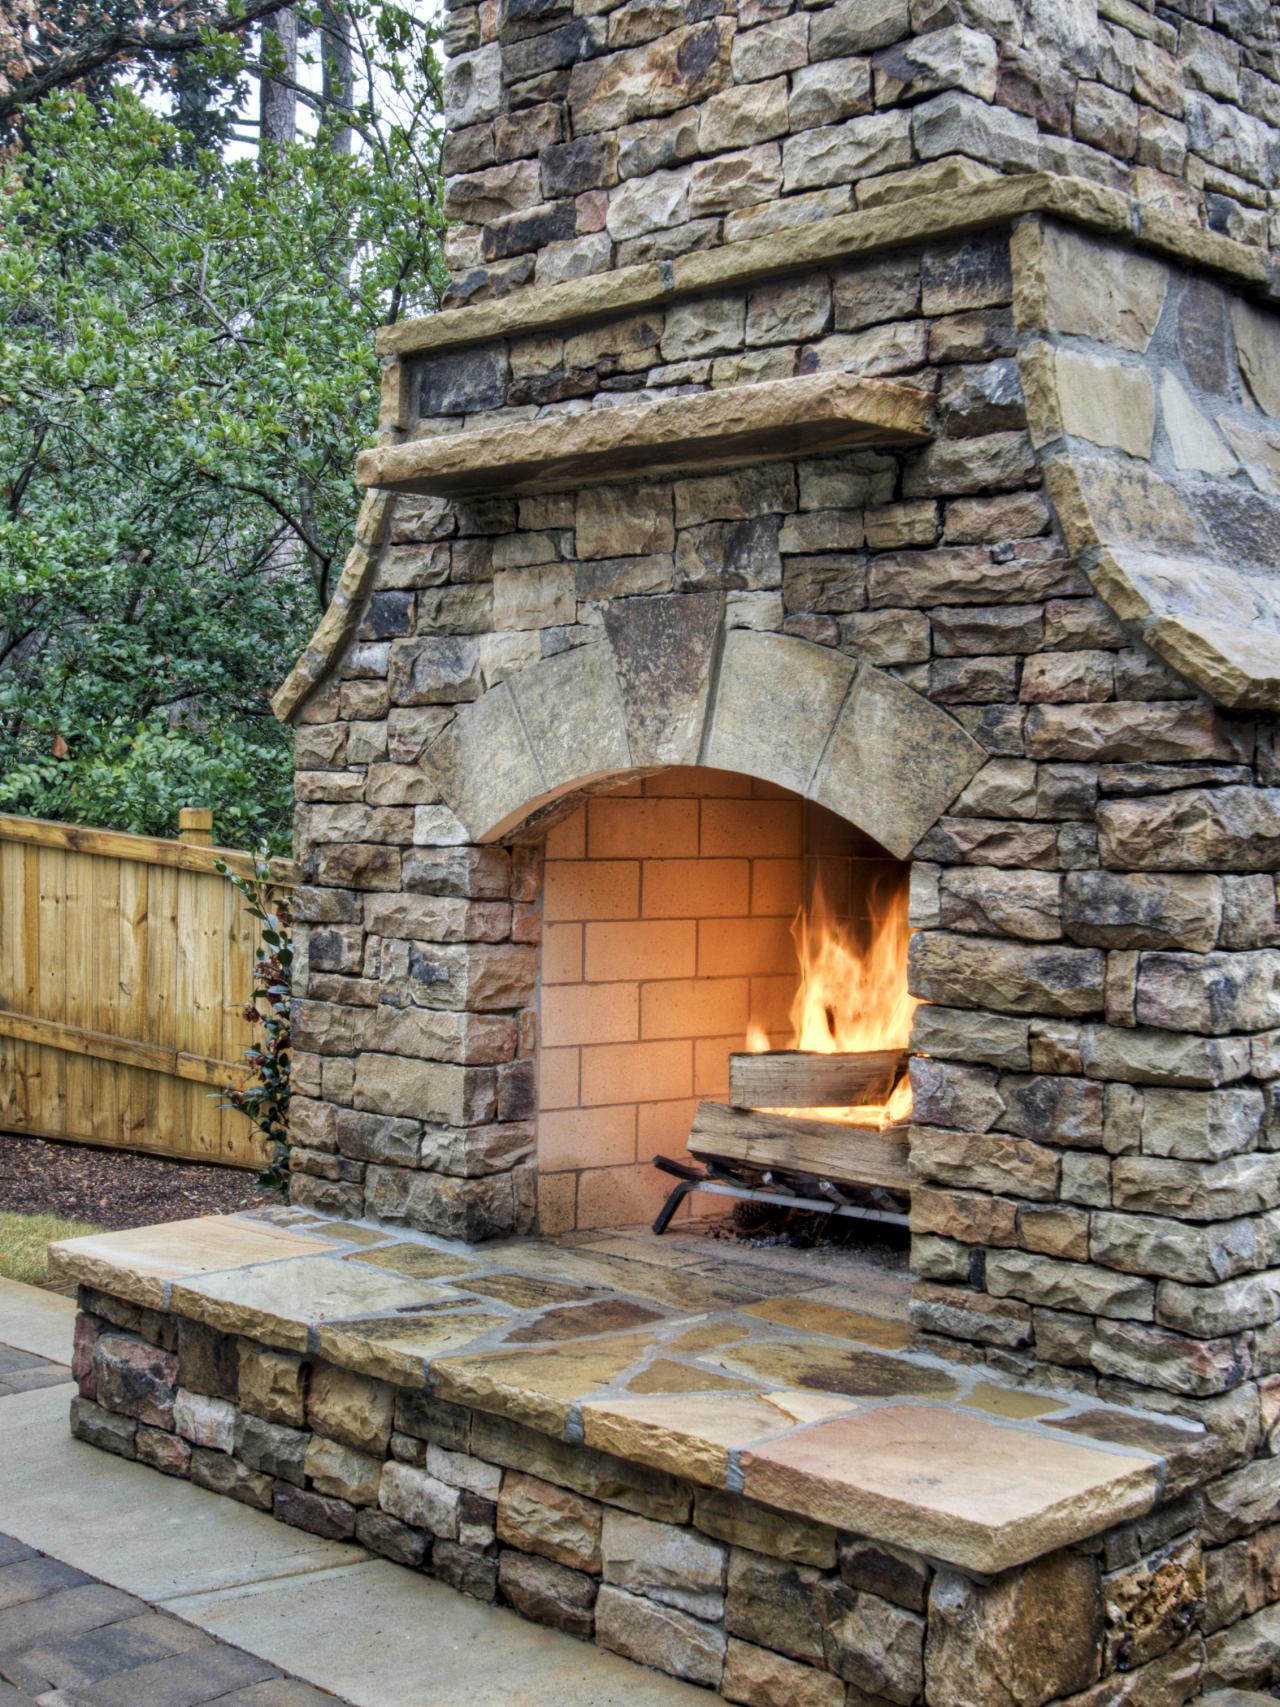 How To Build An Outdoor Stacked Stone, How To Make A Stacked Stone Fireplace